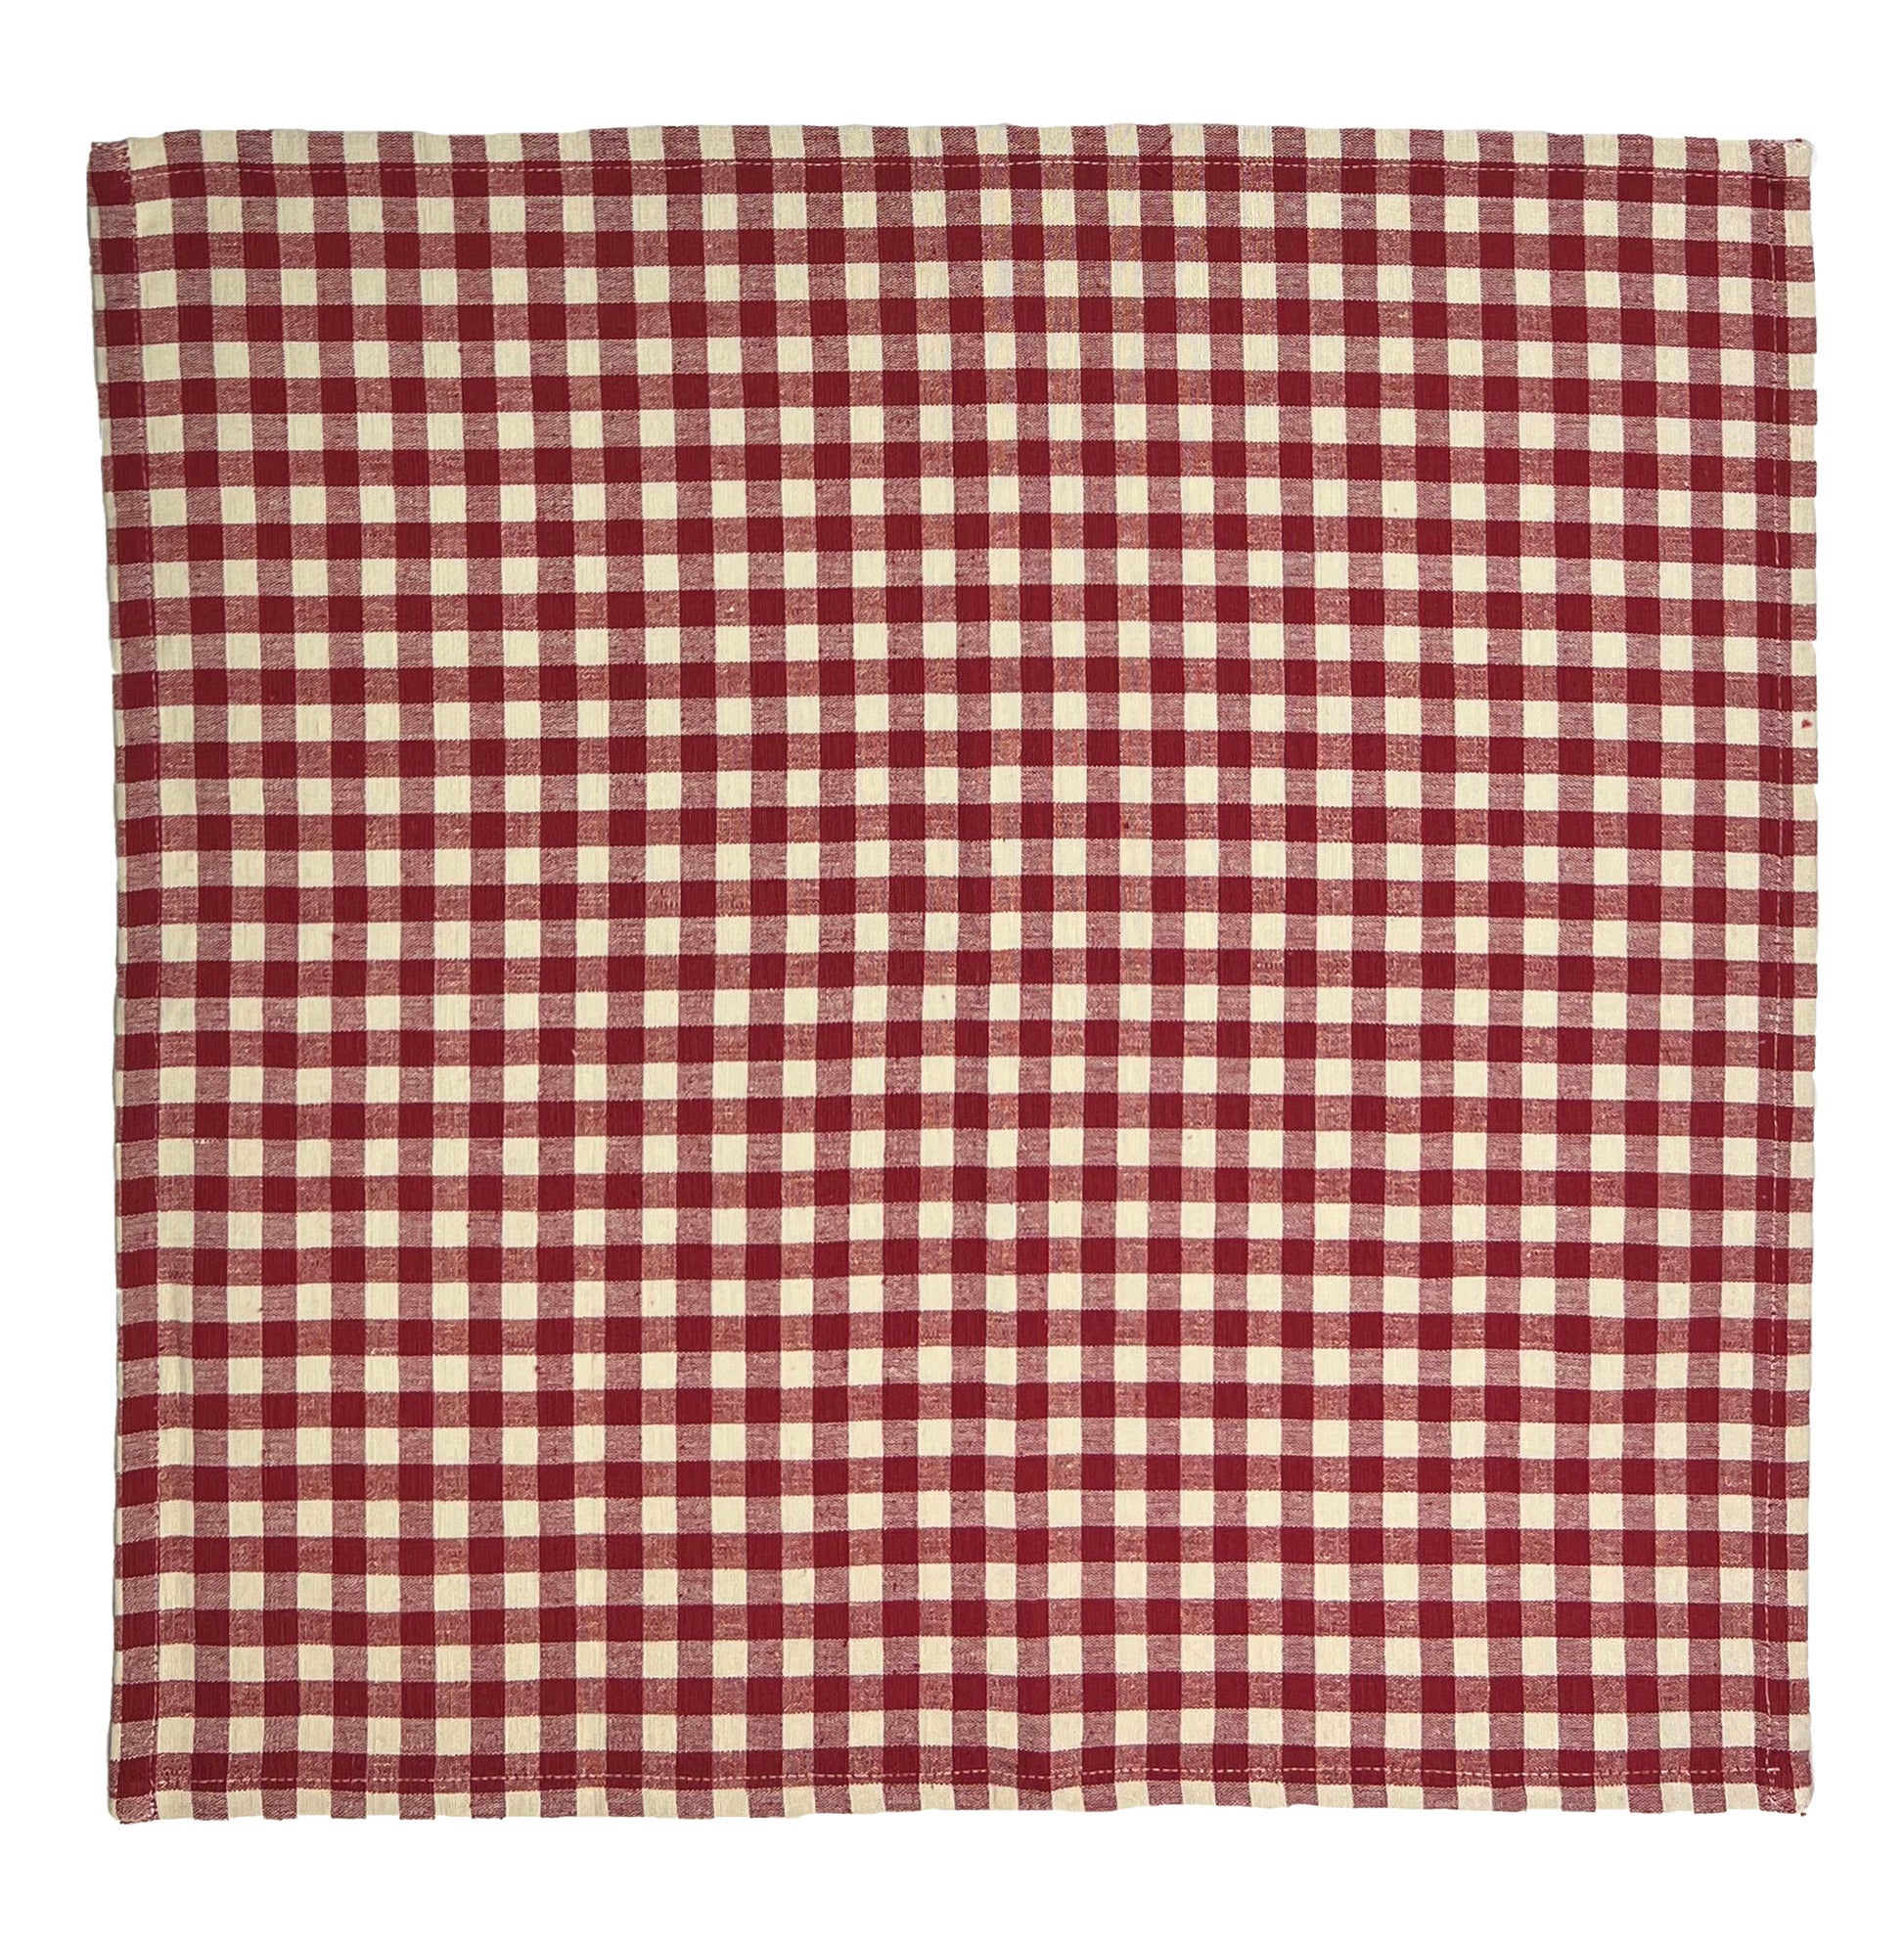 Ziro red napkin spread out. From Sterck & Co.